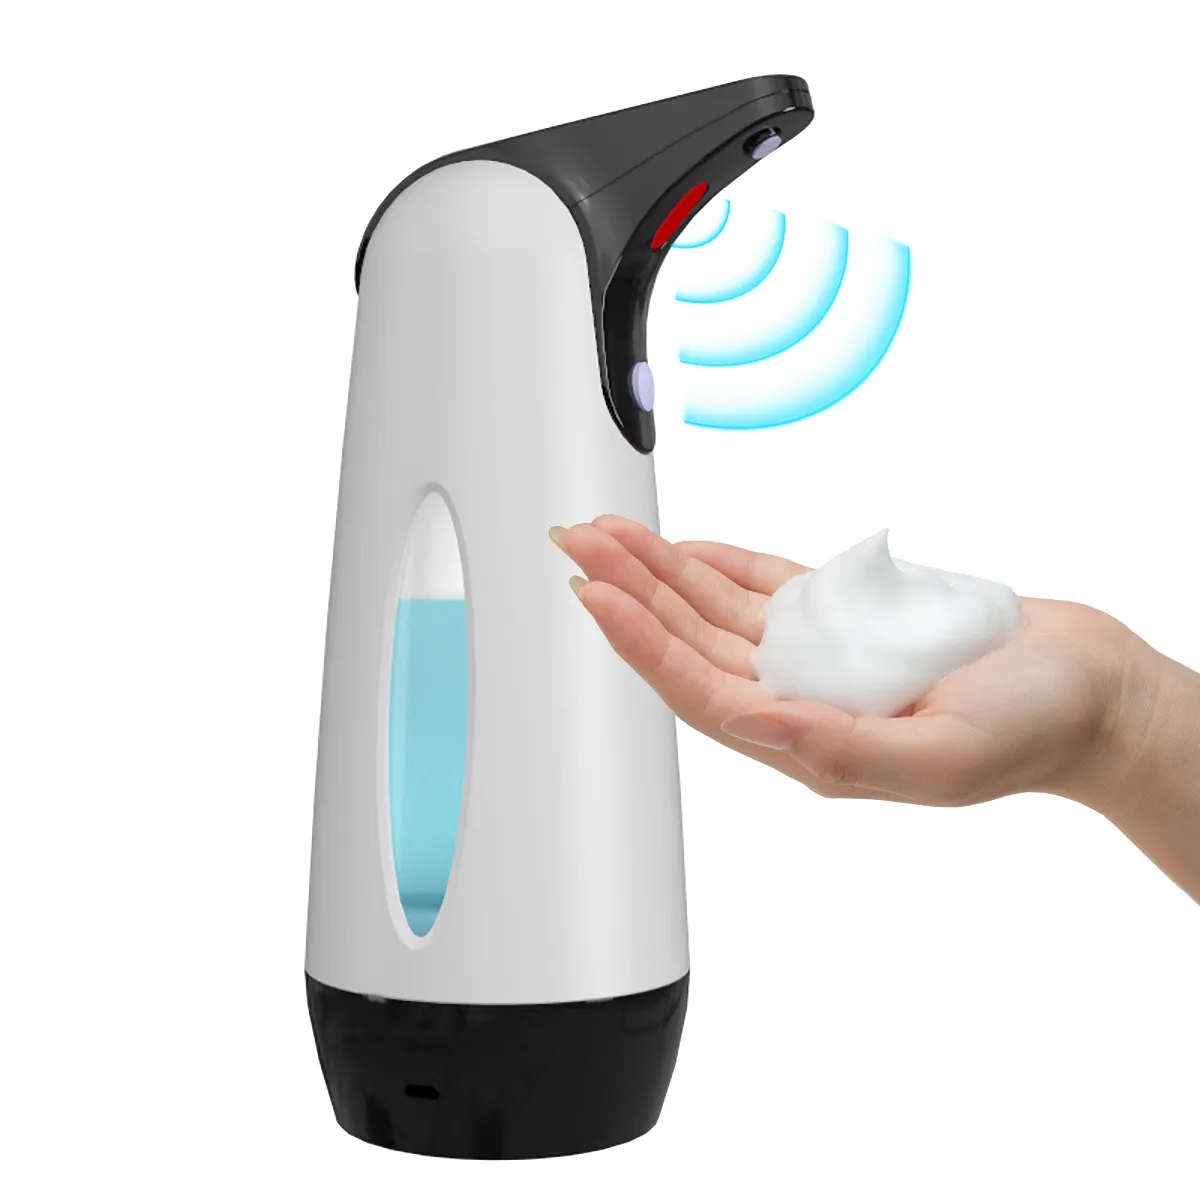 New Version Update Button Automatic Soap Dispenser, Stainless Steel Touchless Hand Sensor Automatic Soap Dispenser